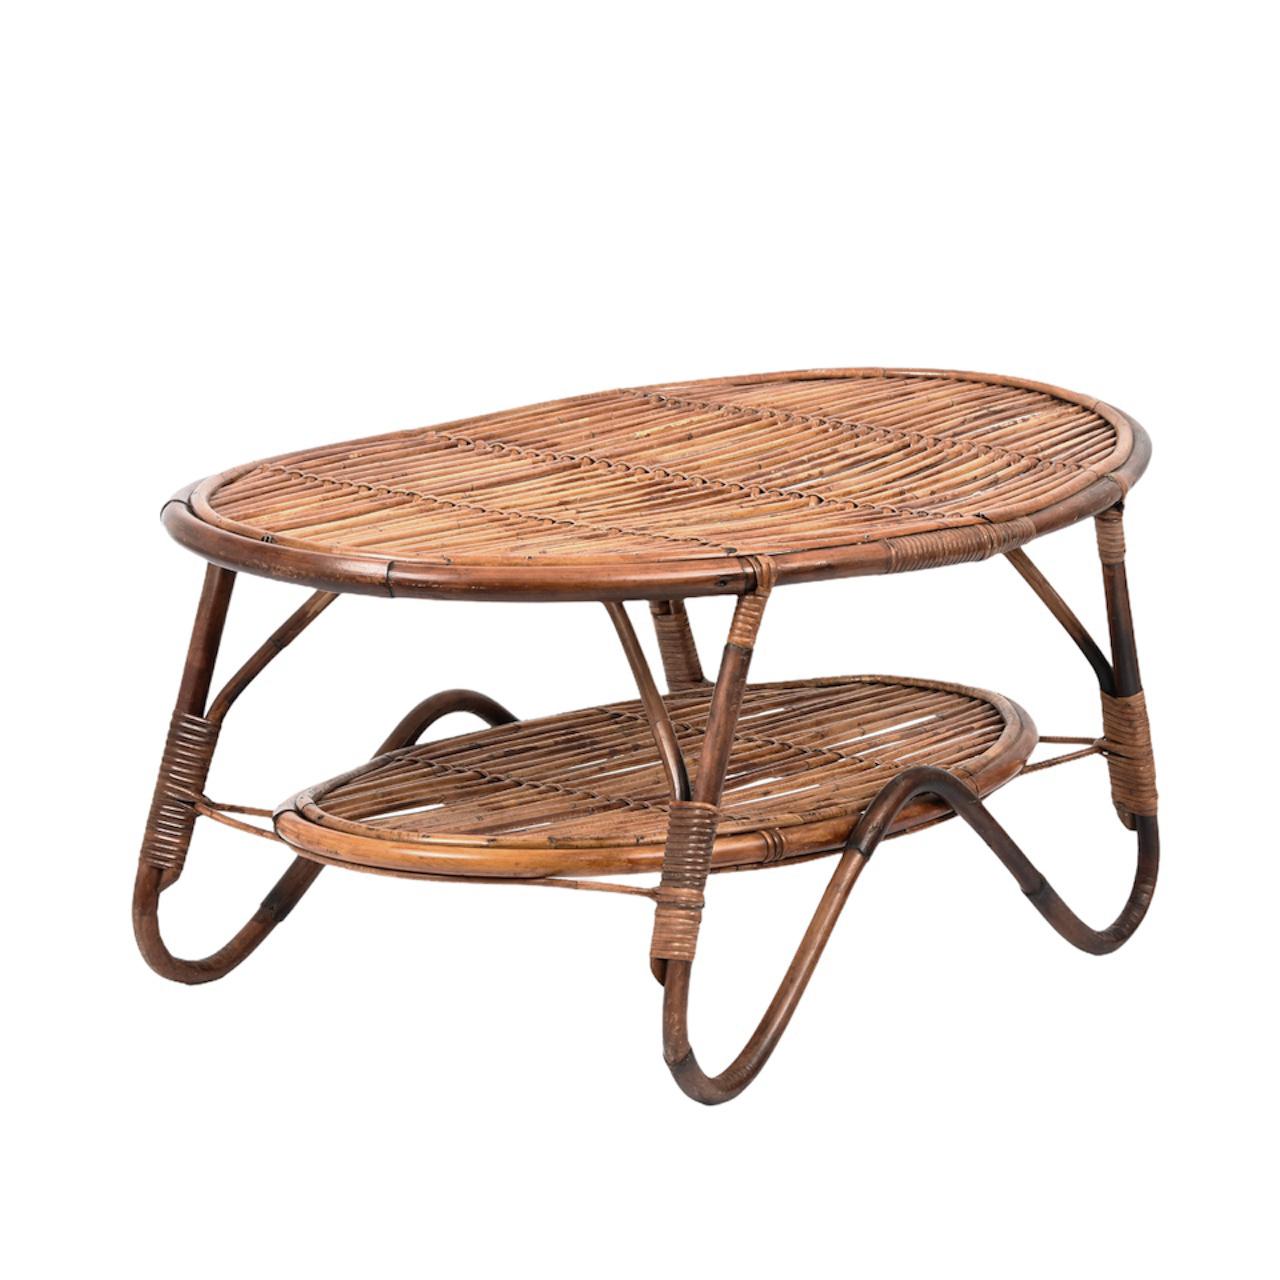 Mid-20th Century Midcentury Italian Oval Rattan and Bamboo Two Levels Coffee Table, 1950s For Sale